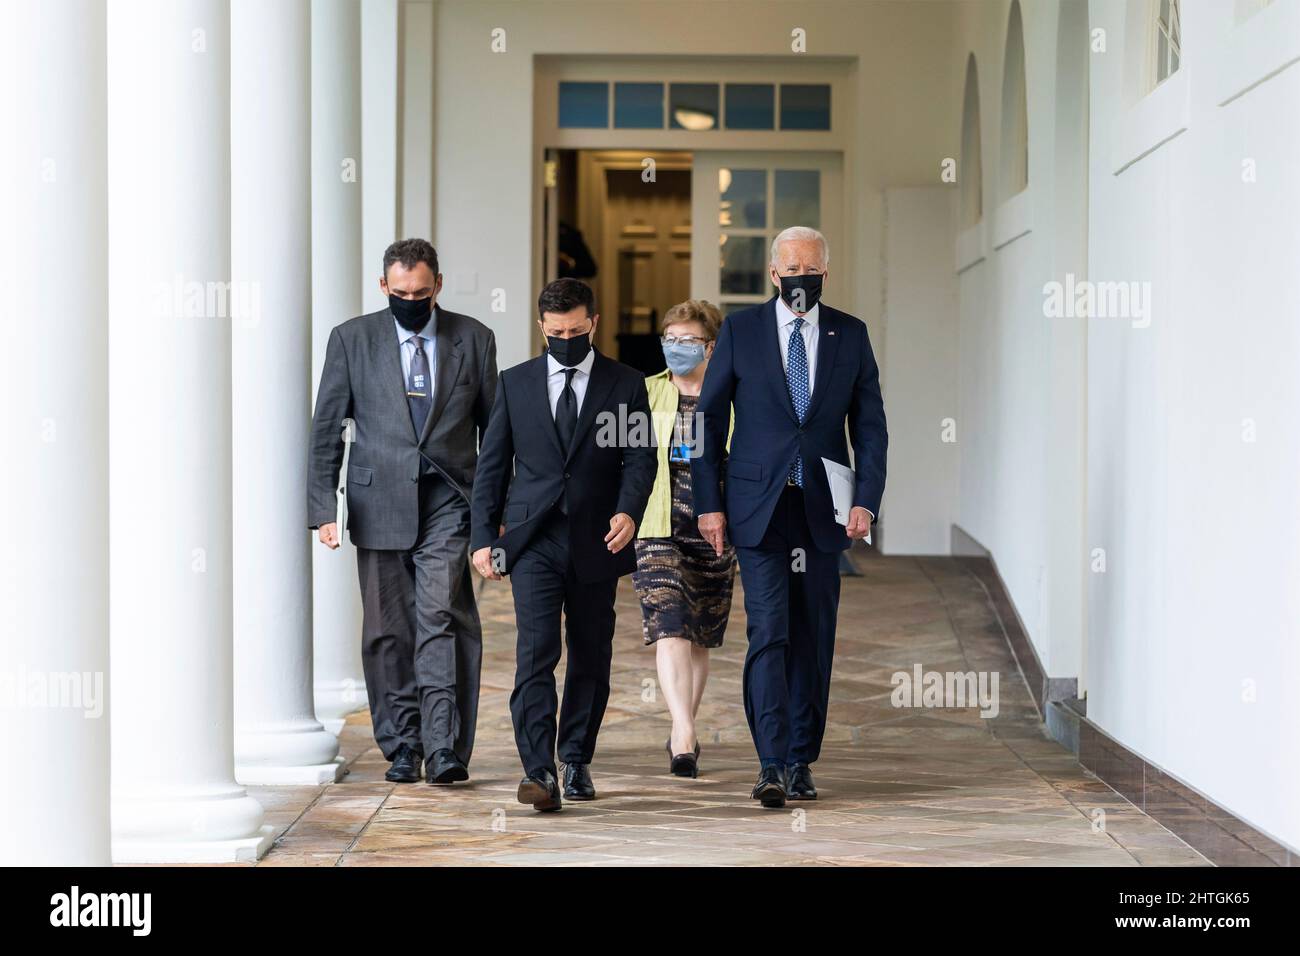 Washington, United States of America. 01 September, 2021. U.S President Joe Biden walks with Ukraine President Volodymyr Zelenskyy and their interpreters along the West Colonnade of the White House, on their way to the State Dining Room for an expanded bilateral meeting, September 1, 2021 in Washington, D.C.  Credit: Adam Schultz/White House Photo/Alamy Live News Stock Photo